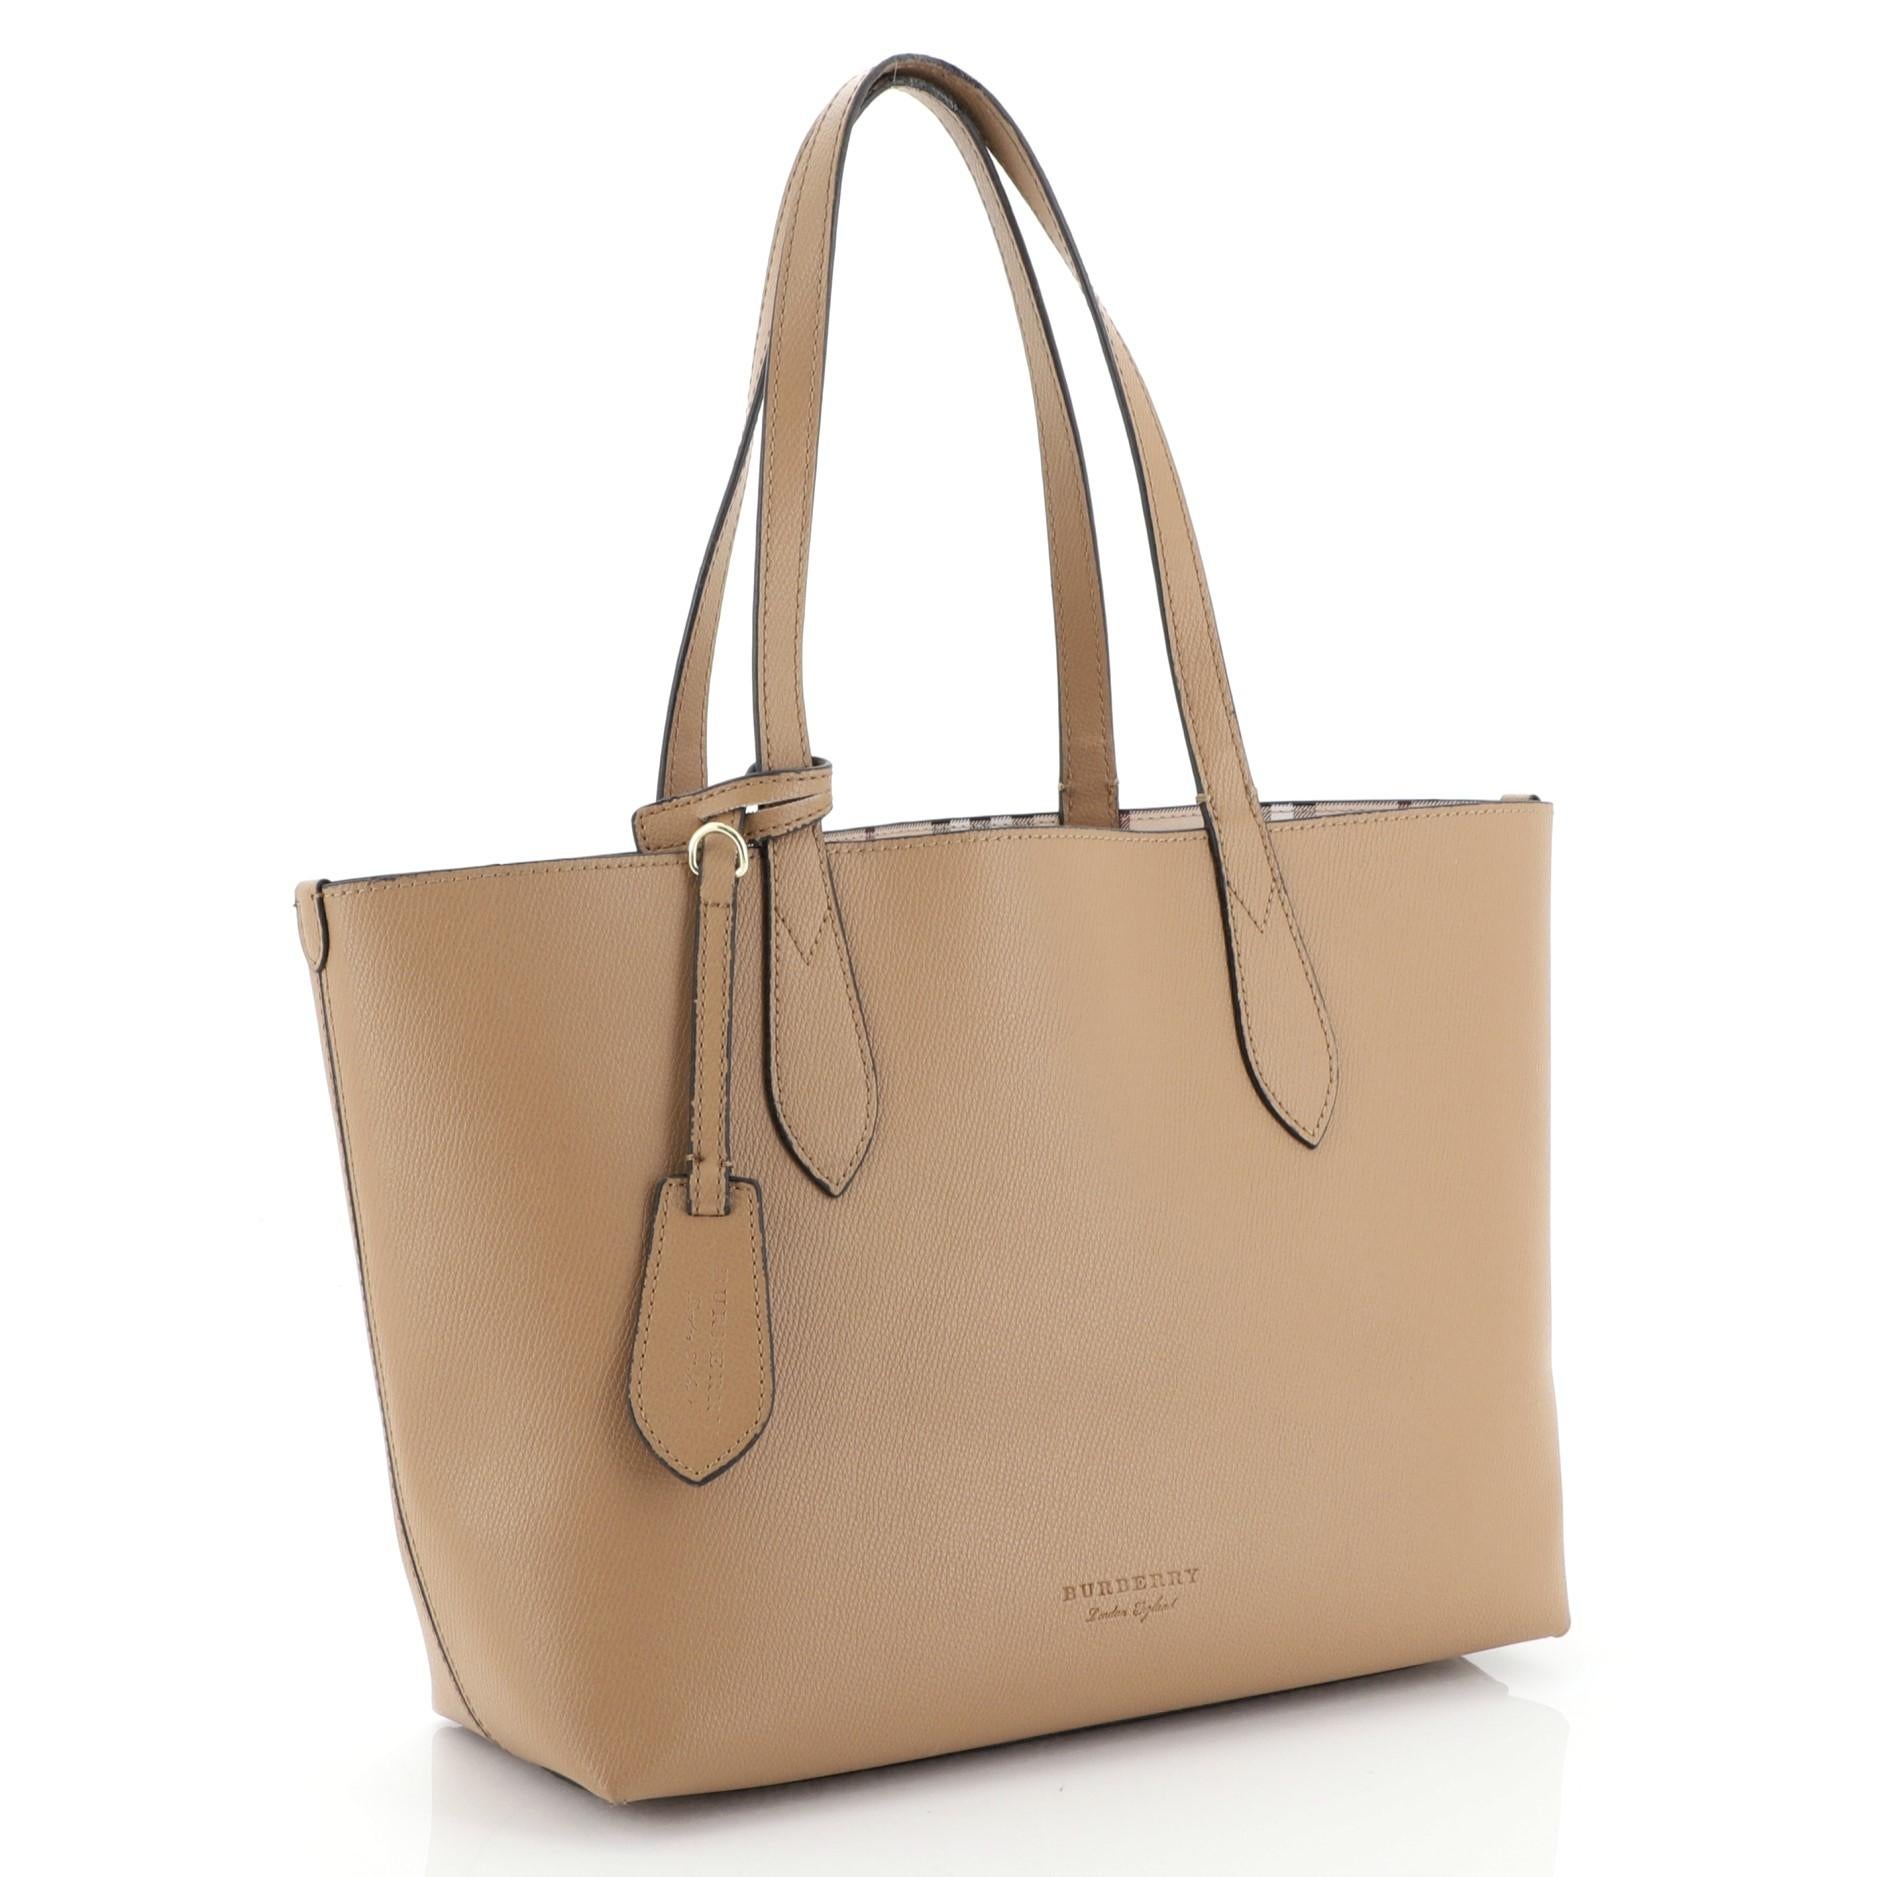 This Burberry Reversible Tote Haymarket Coated Canvas and Leather Small, crafted in neutral printed coated canvas and leather, features dual flat leather straps and gold-tone hardware. Its wide open top showcases a reversible neutral printed coated